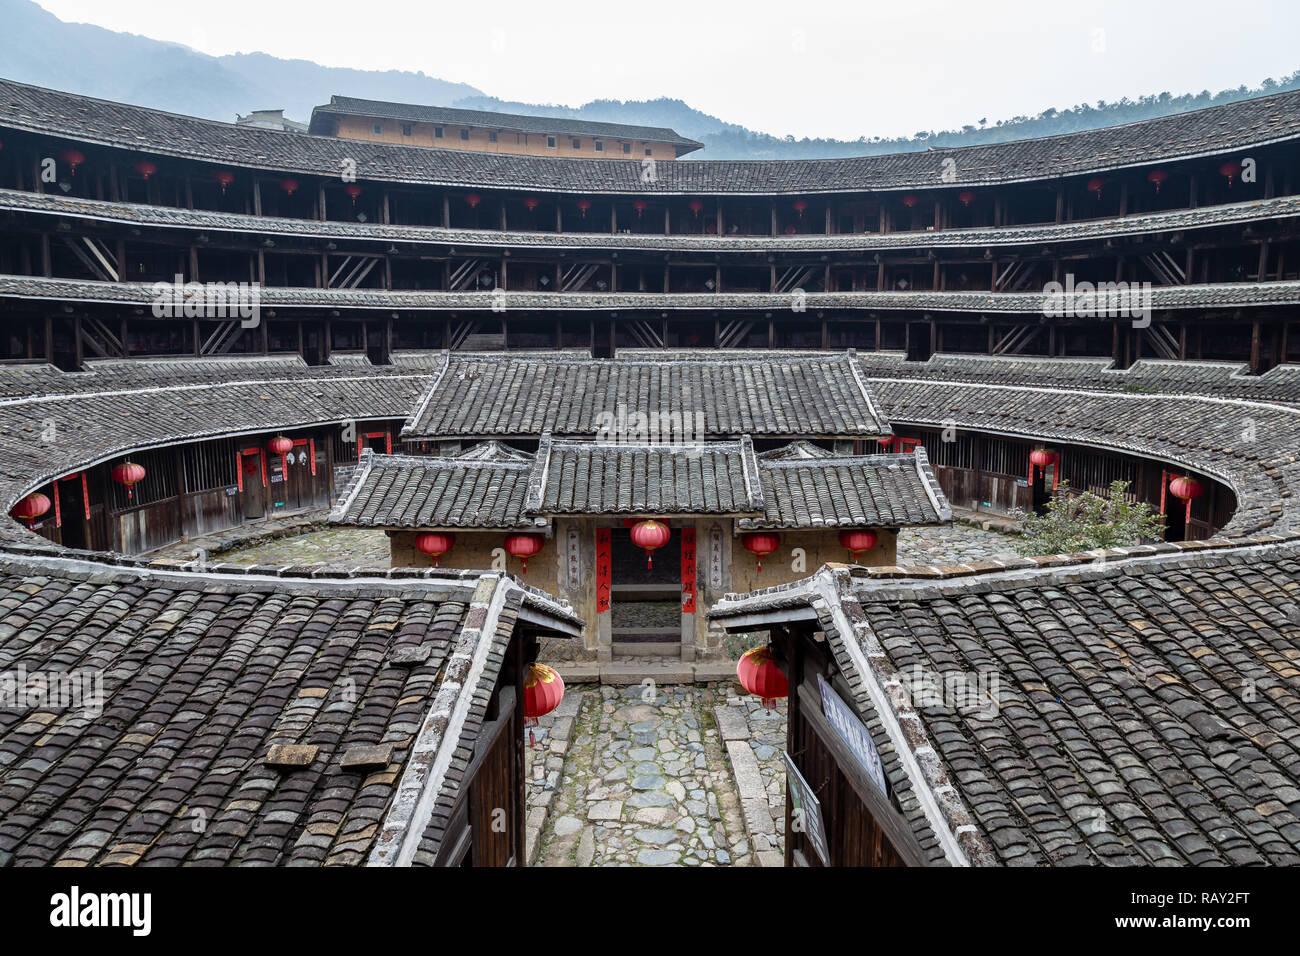 Jiqing Lou in ChuXi Cluster, Fujian Province, China. The tulou are ancient earth dwellings of the Hakka people, still inhabited by local communities Stock Photo